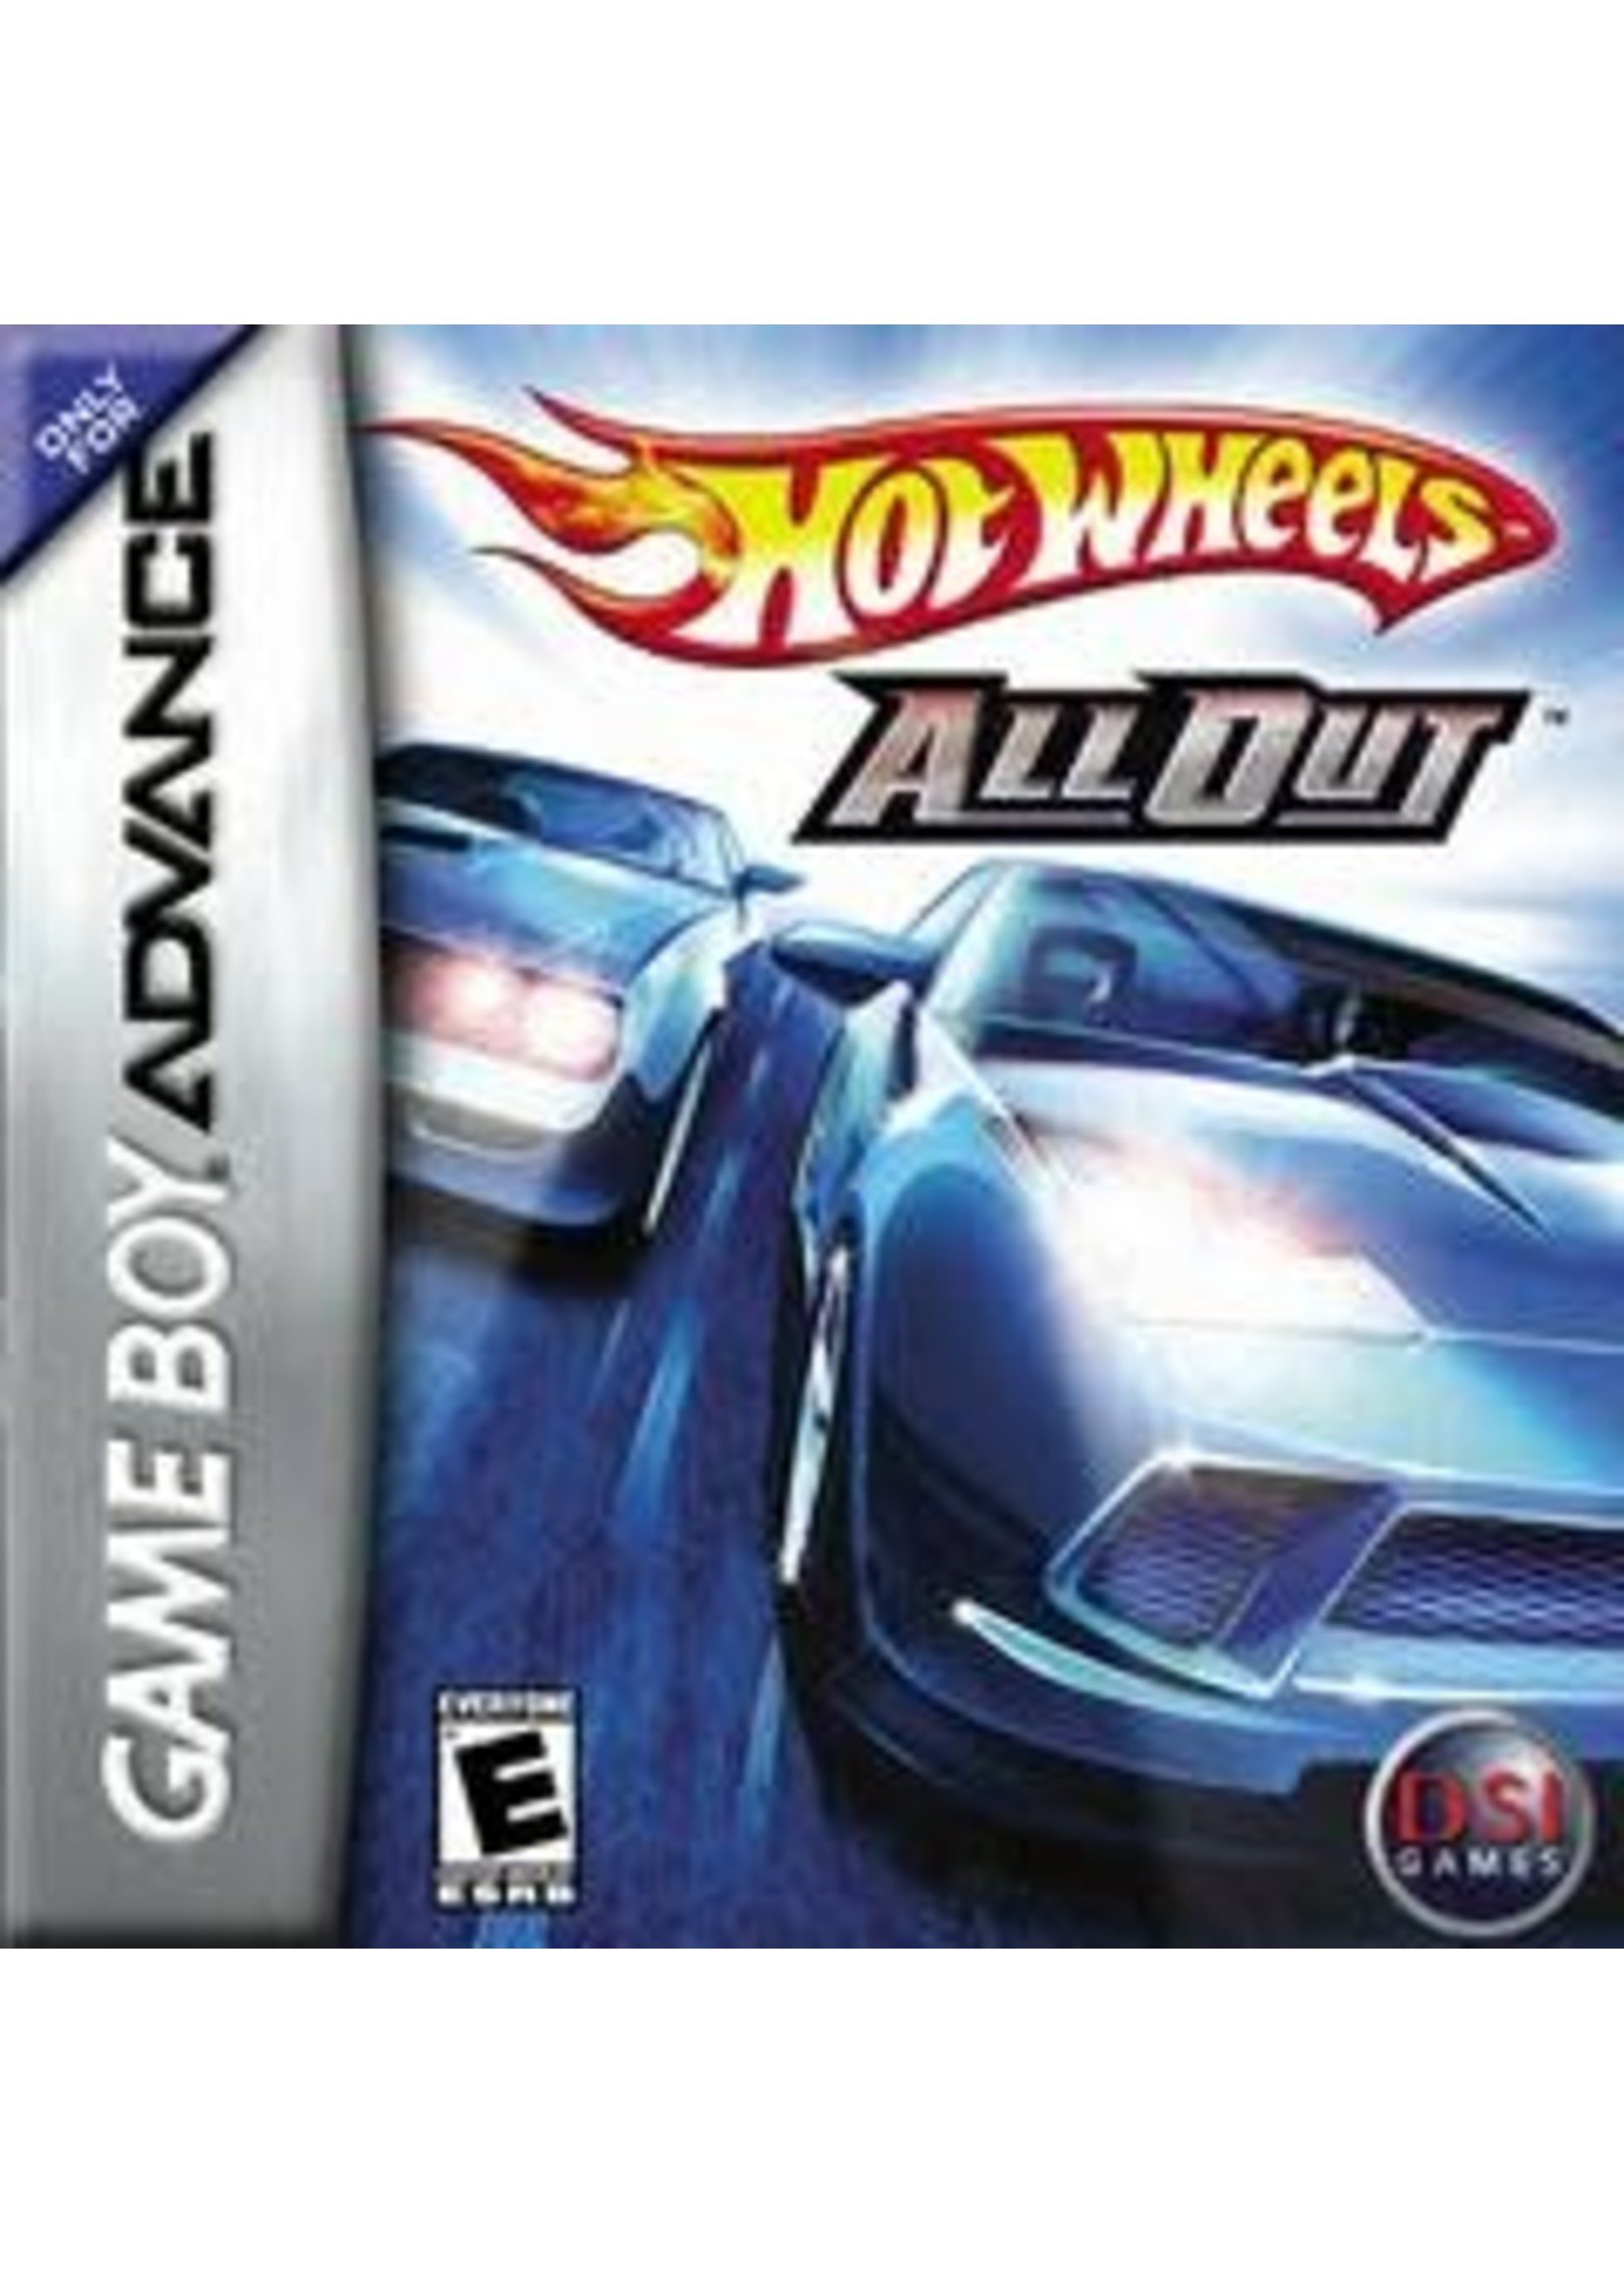 Hot Wheels All Out GameBoy Advance